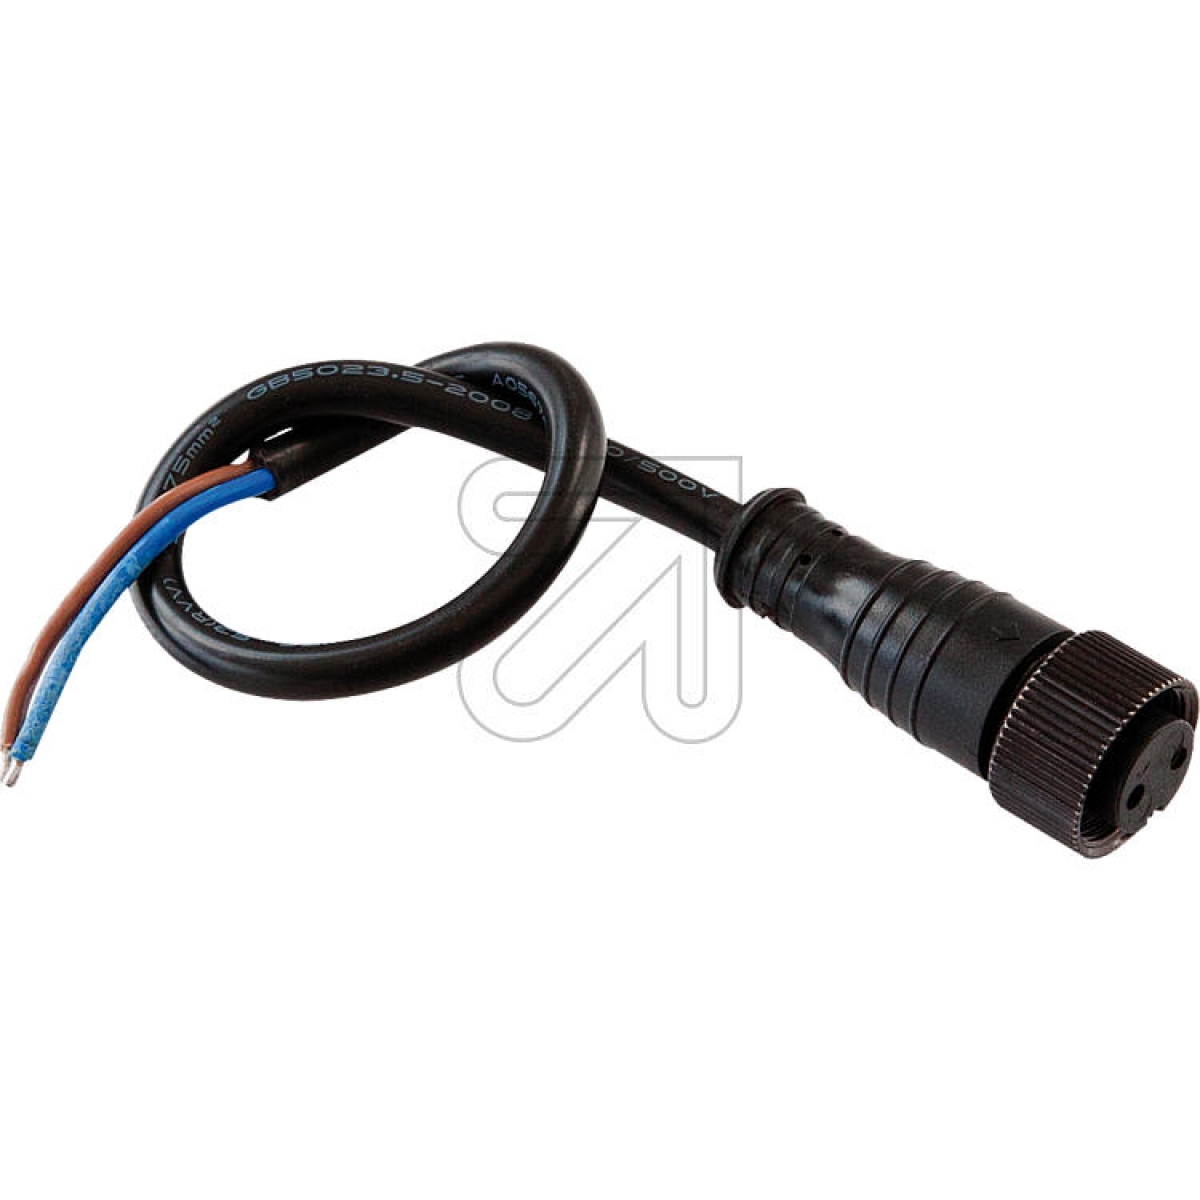 EVNConnecting cable 3m P65ASL300UNI to 624380, 624395Article-No: 624385